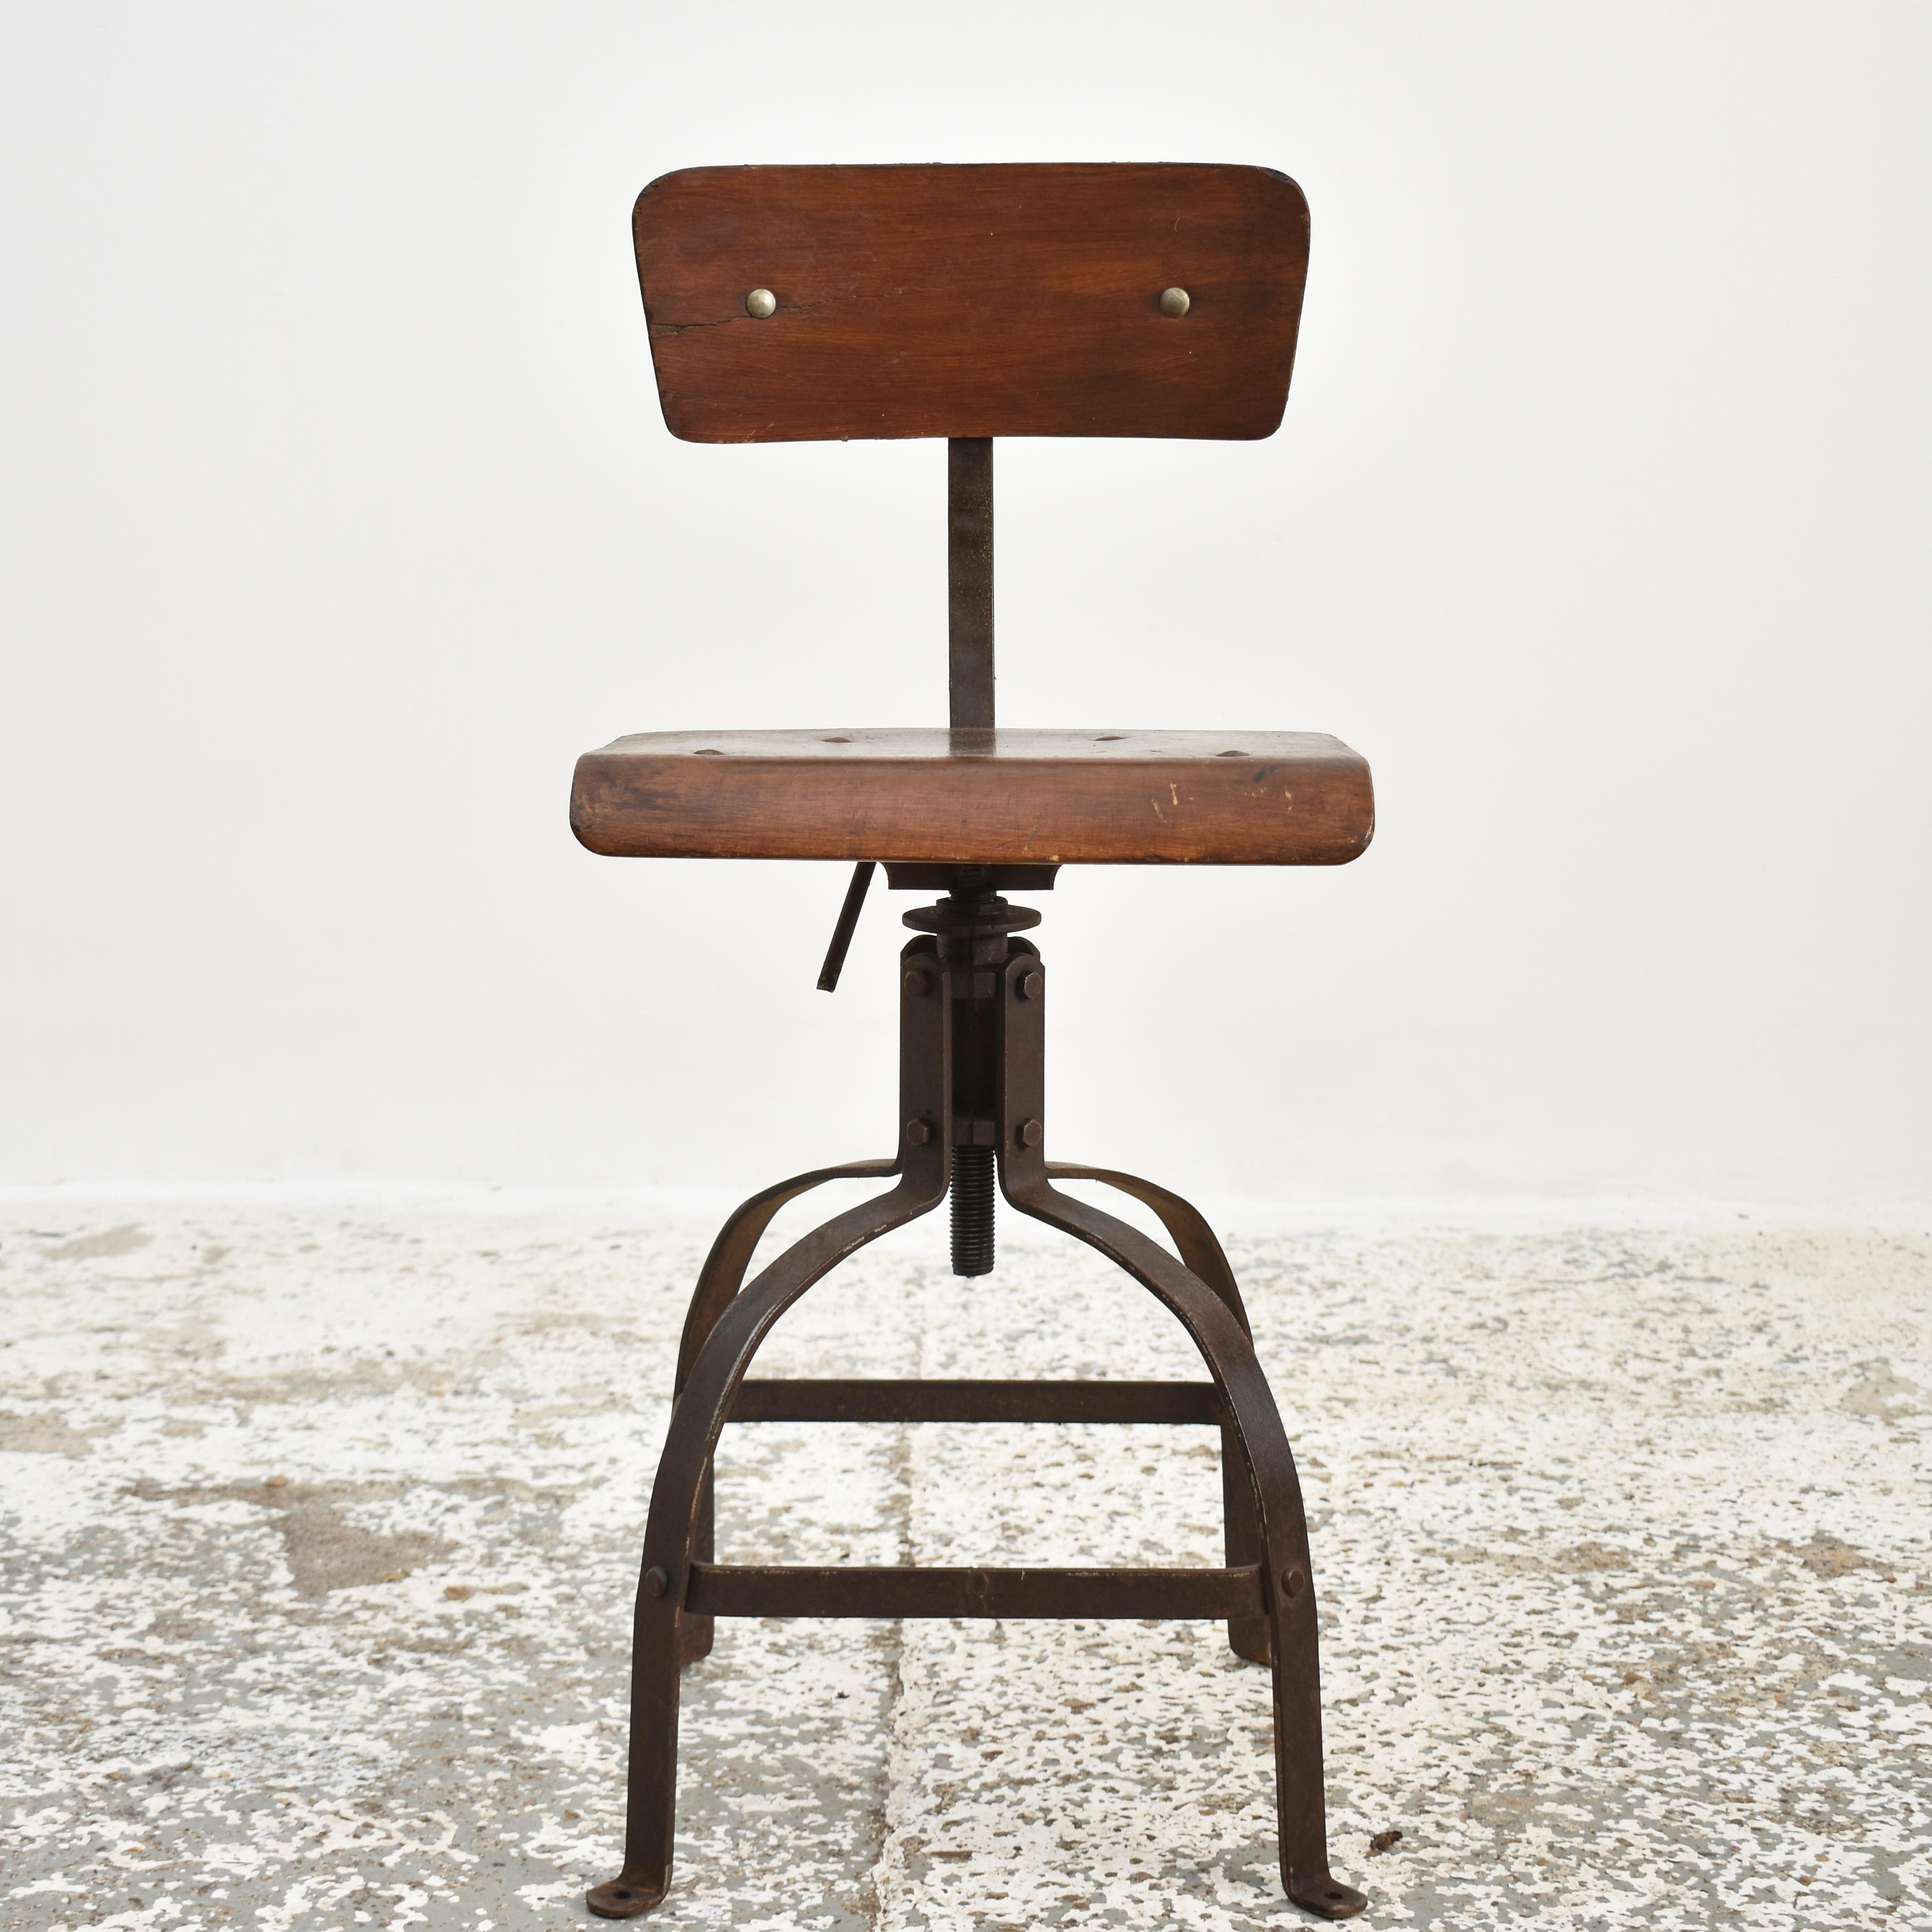 Original French Bienaise Chair Model 204 – D

An original Bienaise Industrial Chair. A classic 1940’s French Industrial Design Produced by the Nelson Brothers – Model No. 204.This chair would have been seen across many industrial French factories in